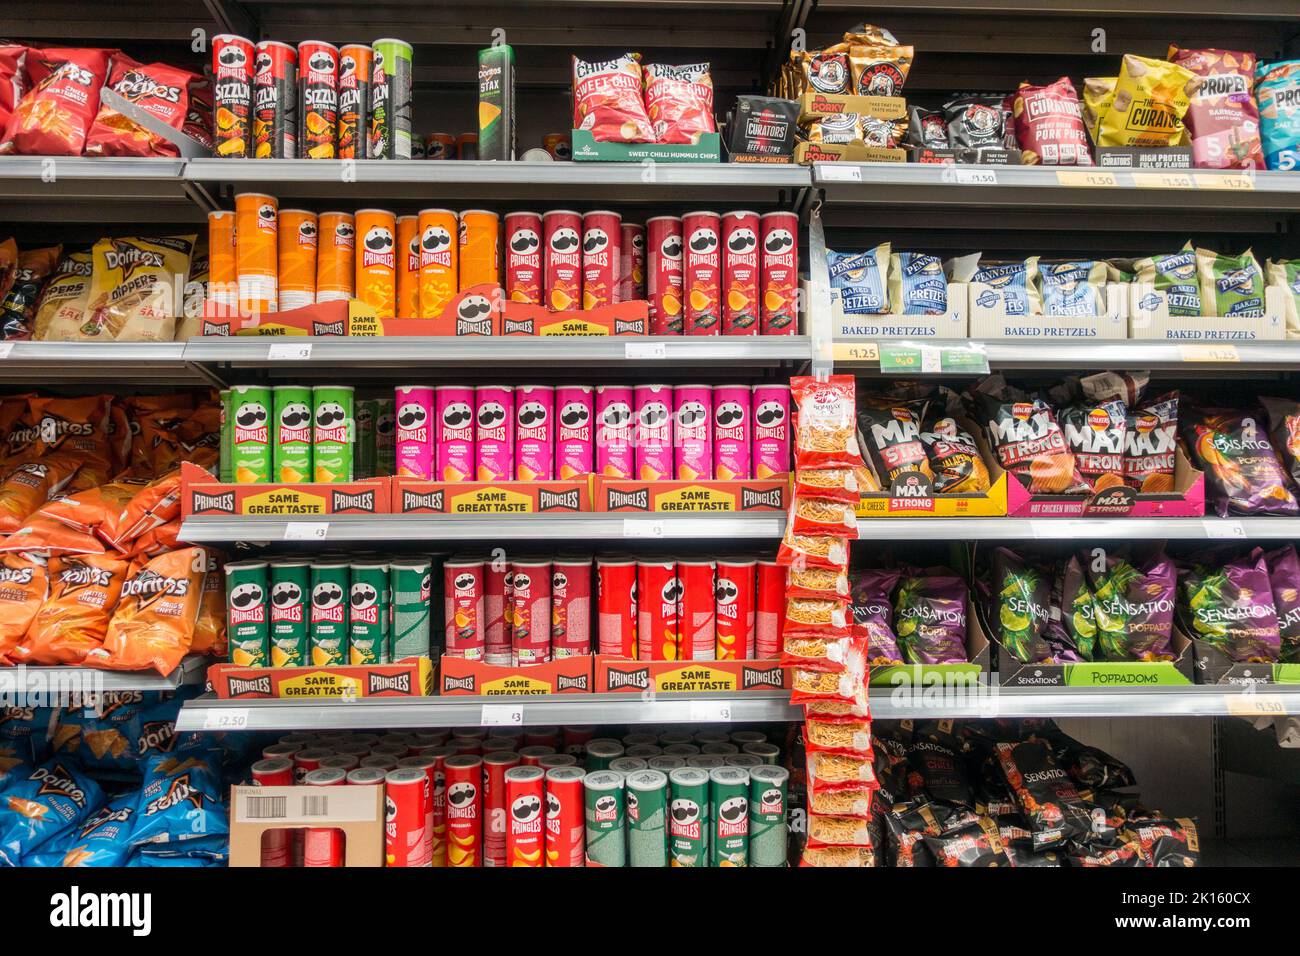 Supermarket shelf filled with unhealthy crisps and savory snacks Stock Photo